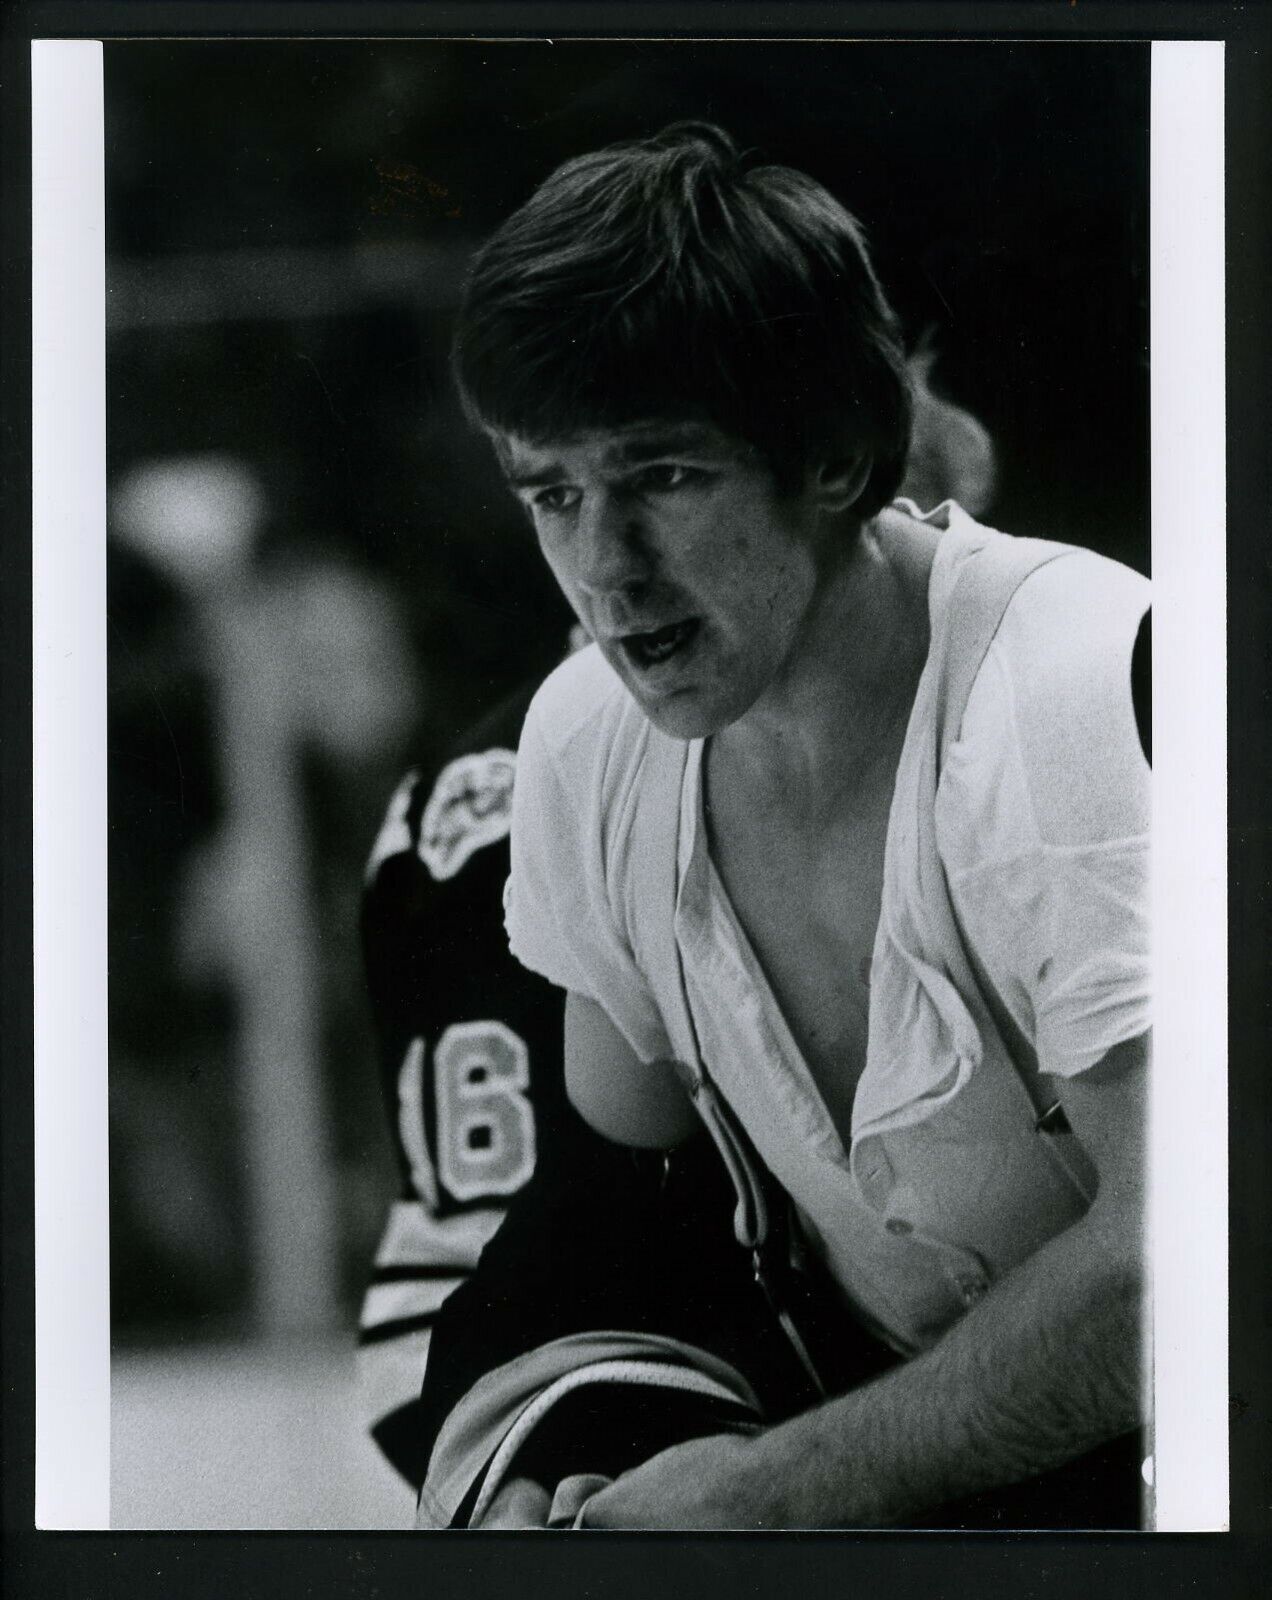 Terry O'Reilly after fight w/ Gillies 1970's Press Photo Poster painting Boston Bruins Islanders